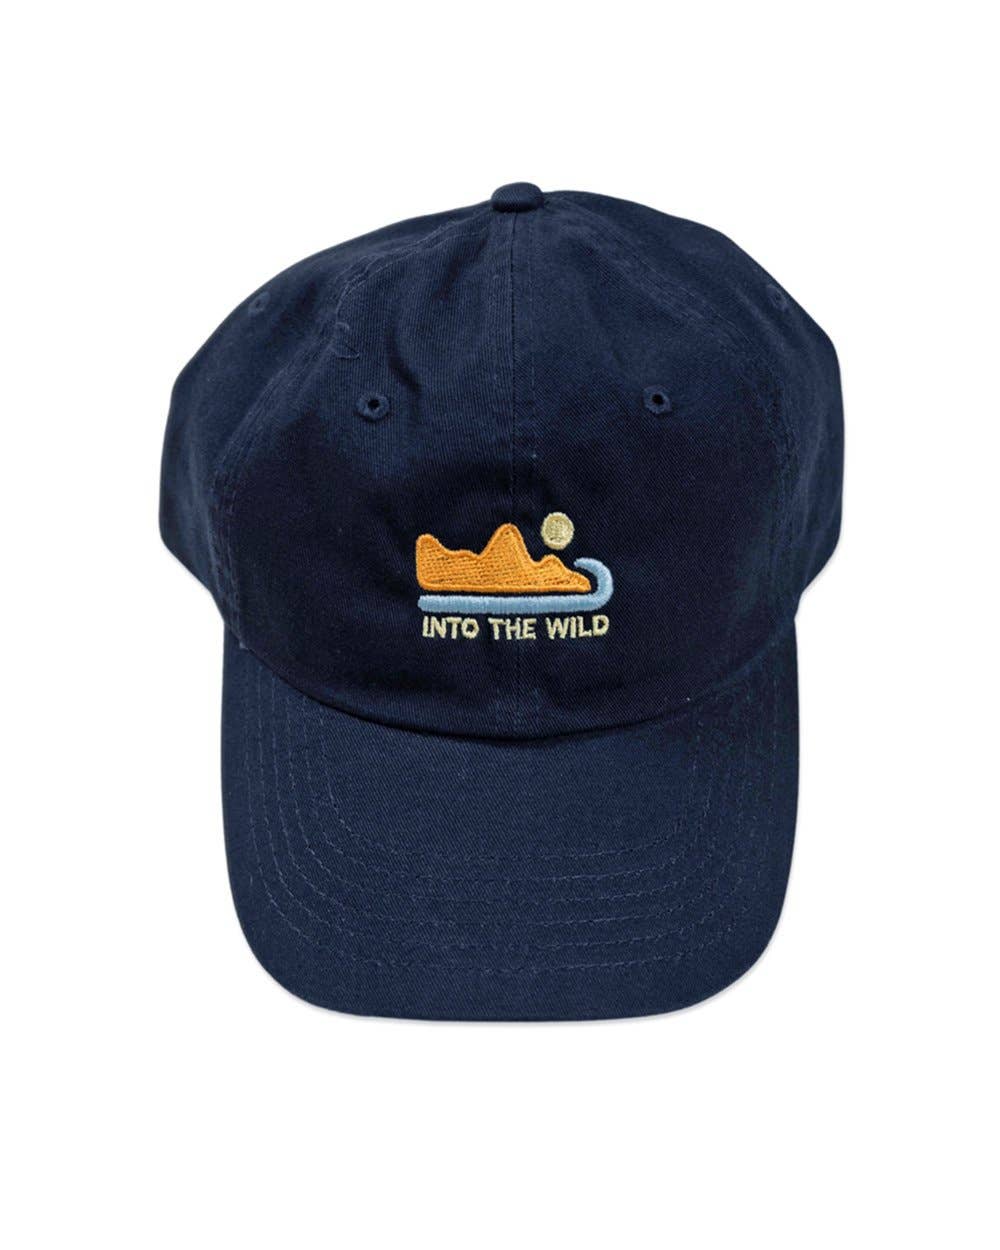 Into the Wild navy dad hat by Keep Nature Wild